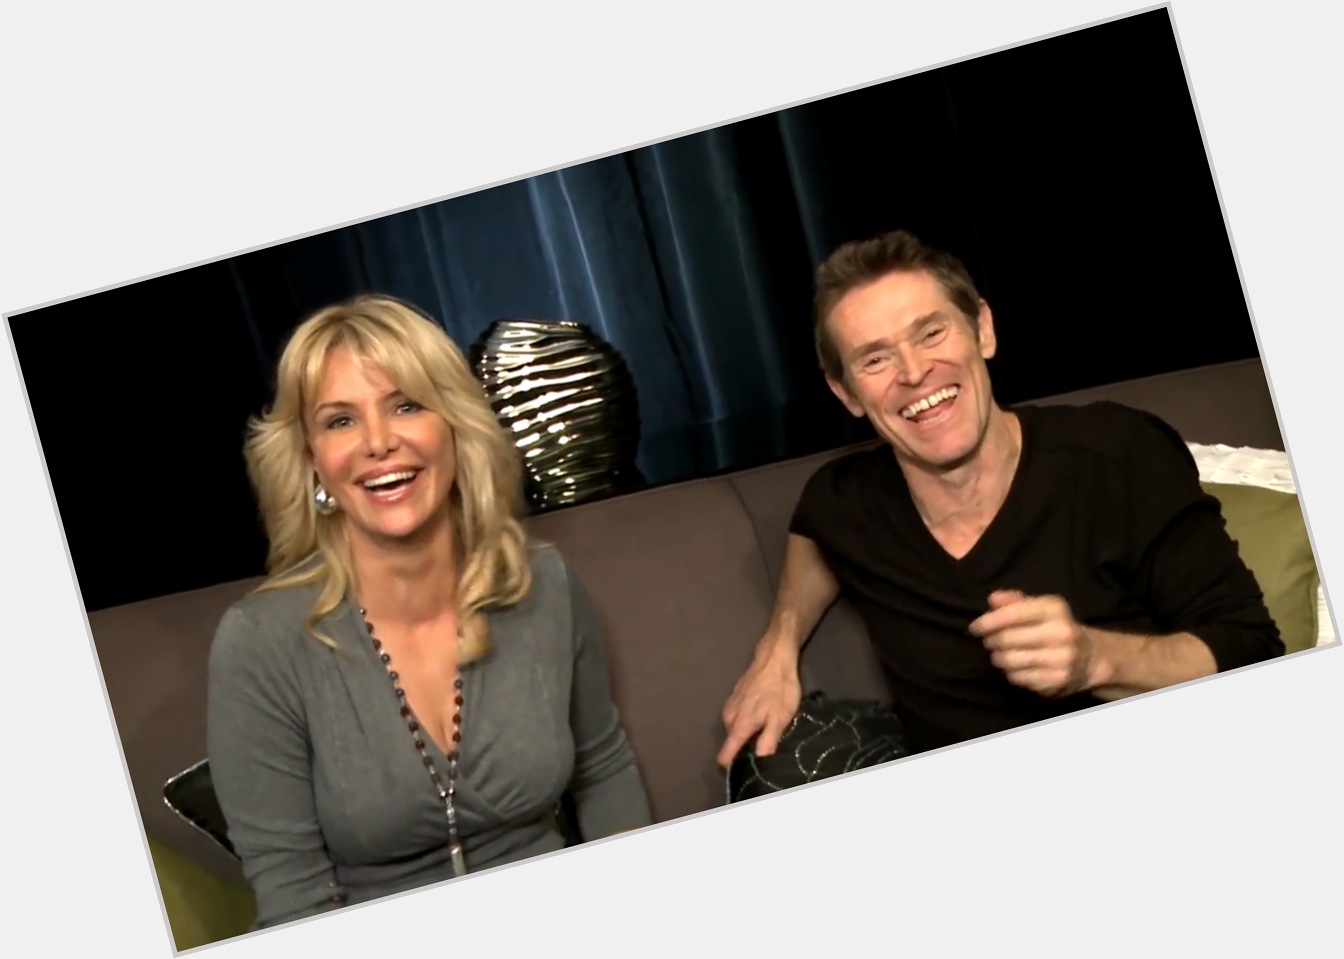 Happy bday Willem Dafoe! We chat about his childhood in Canada! 